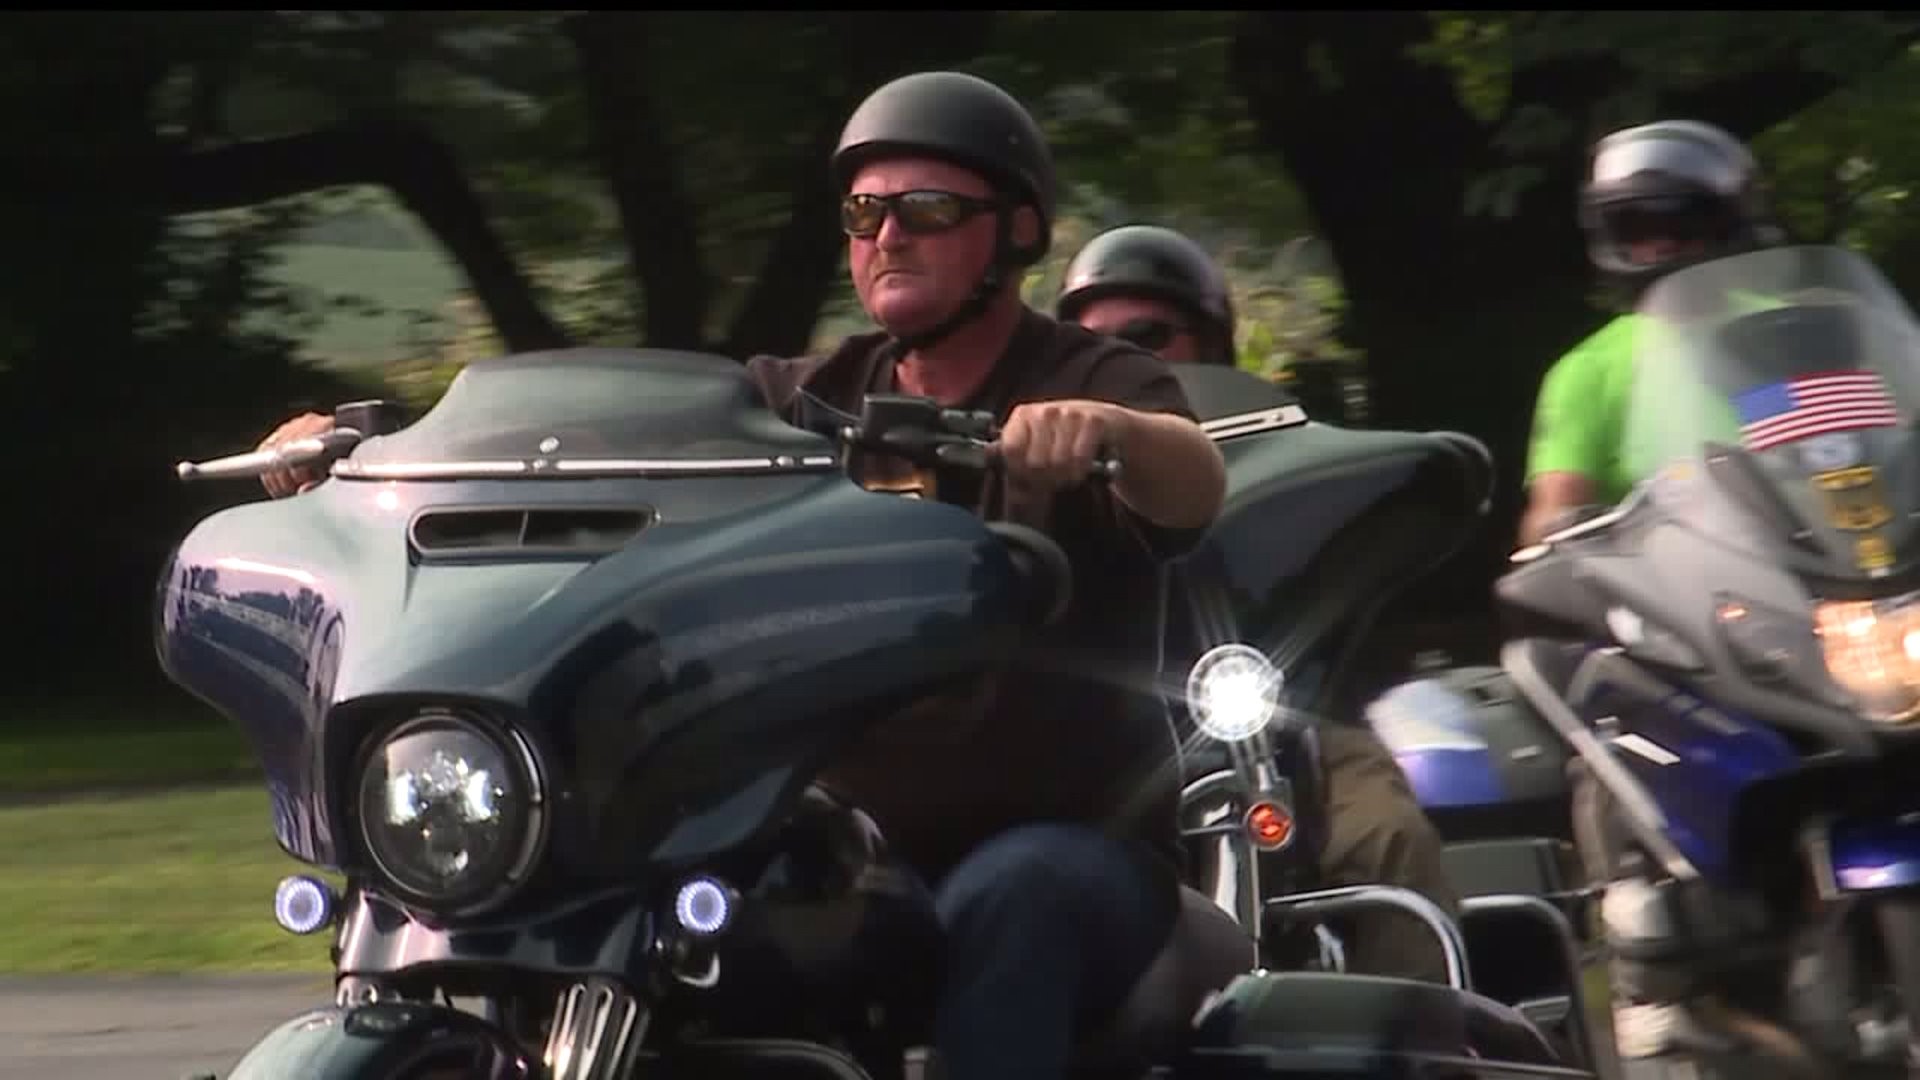 Motorcyclists ride to help veterans